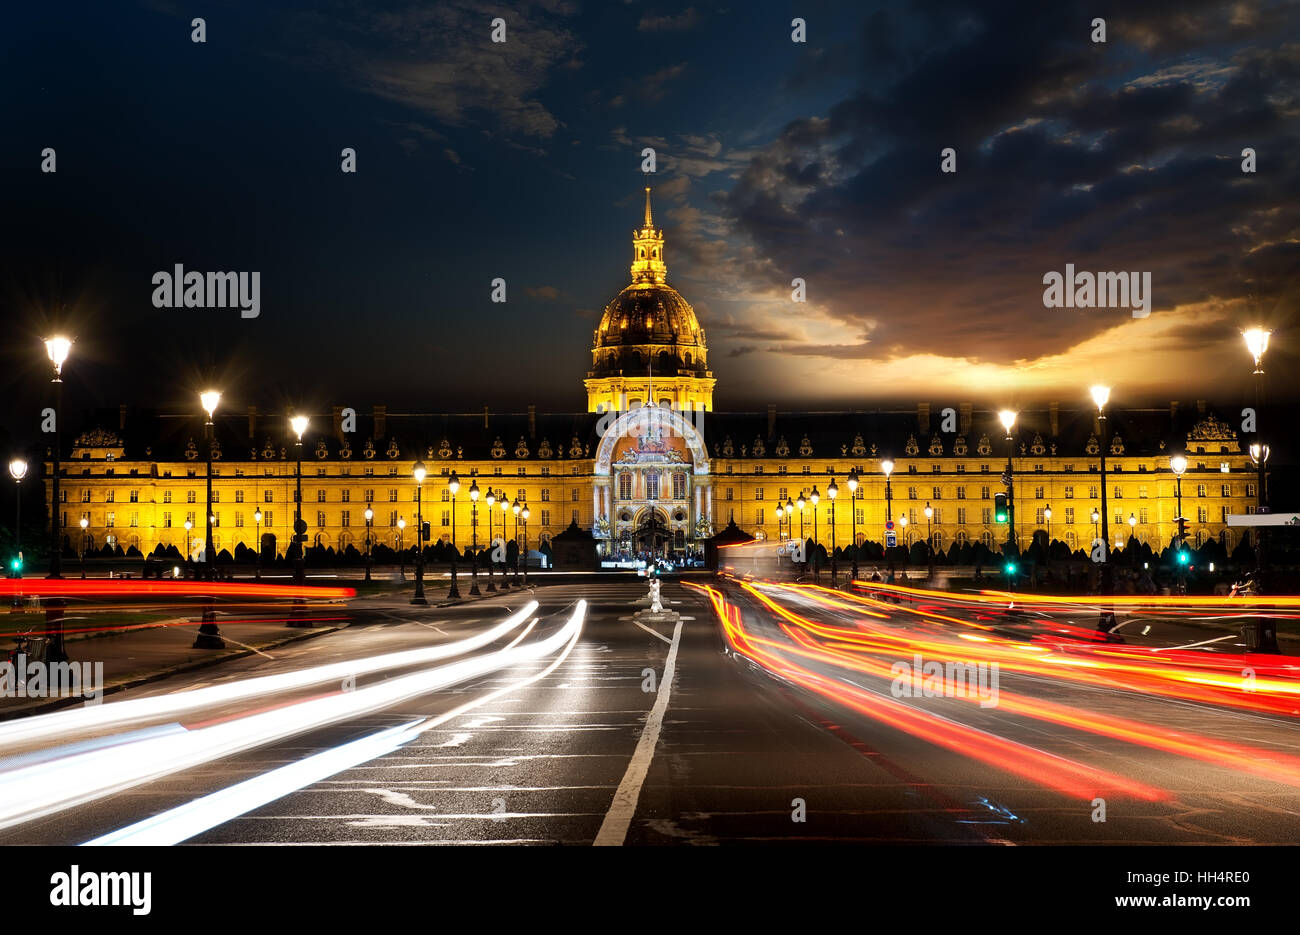 Les Invalides in Paris with evening illumination, France Stock Photo